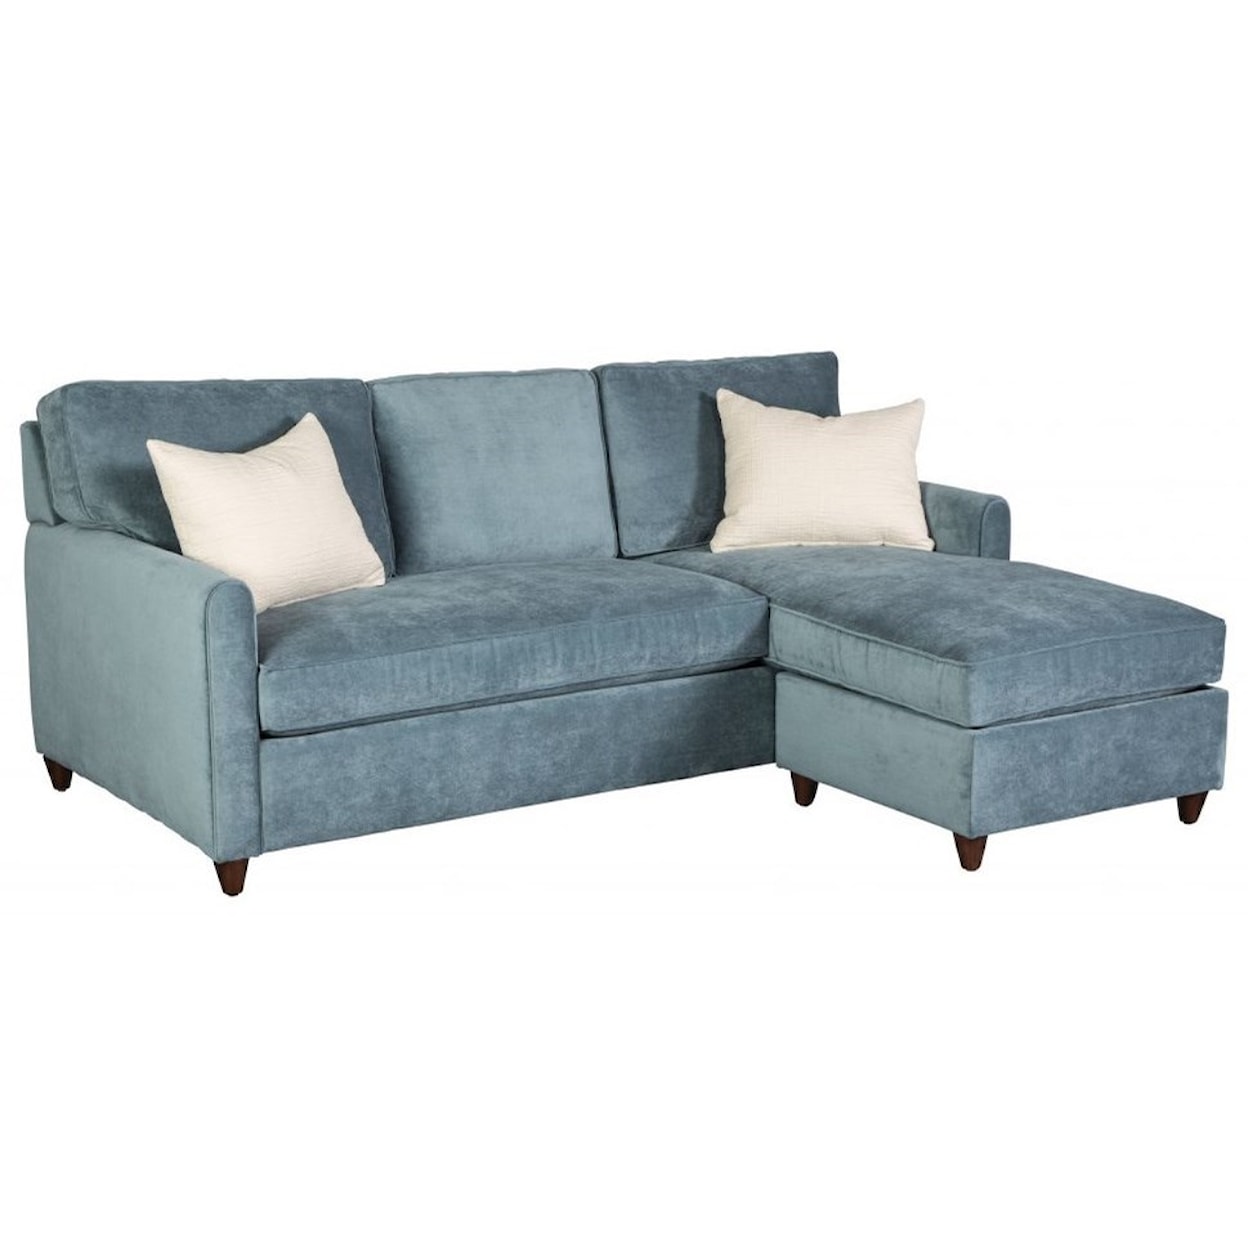 Jonathan Louis Emory Queen Sleeper Sofa with Chaise